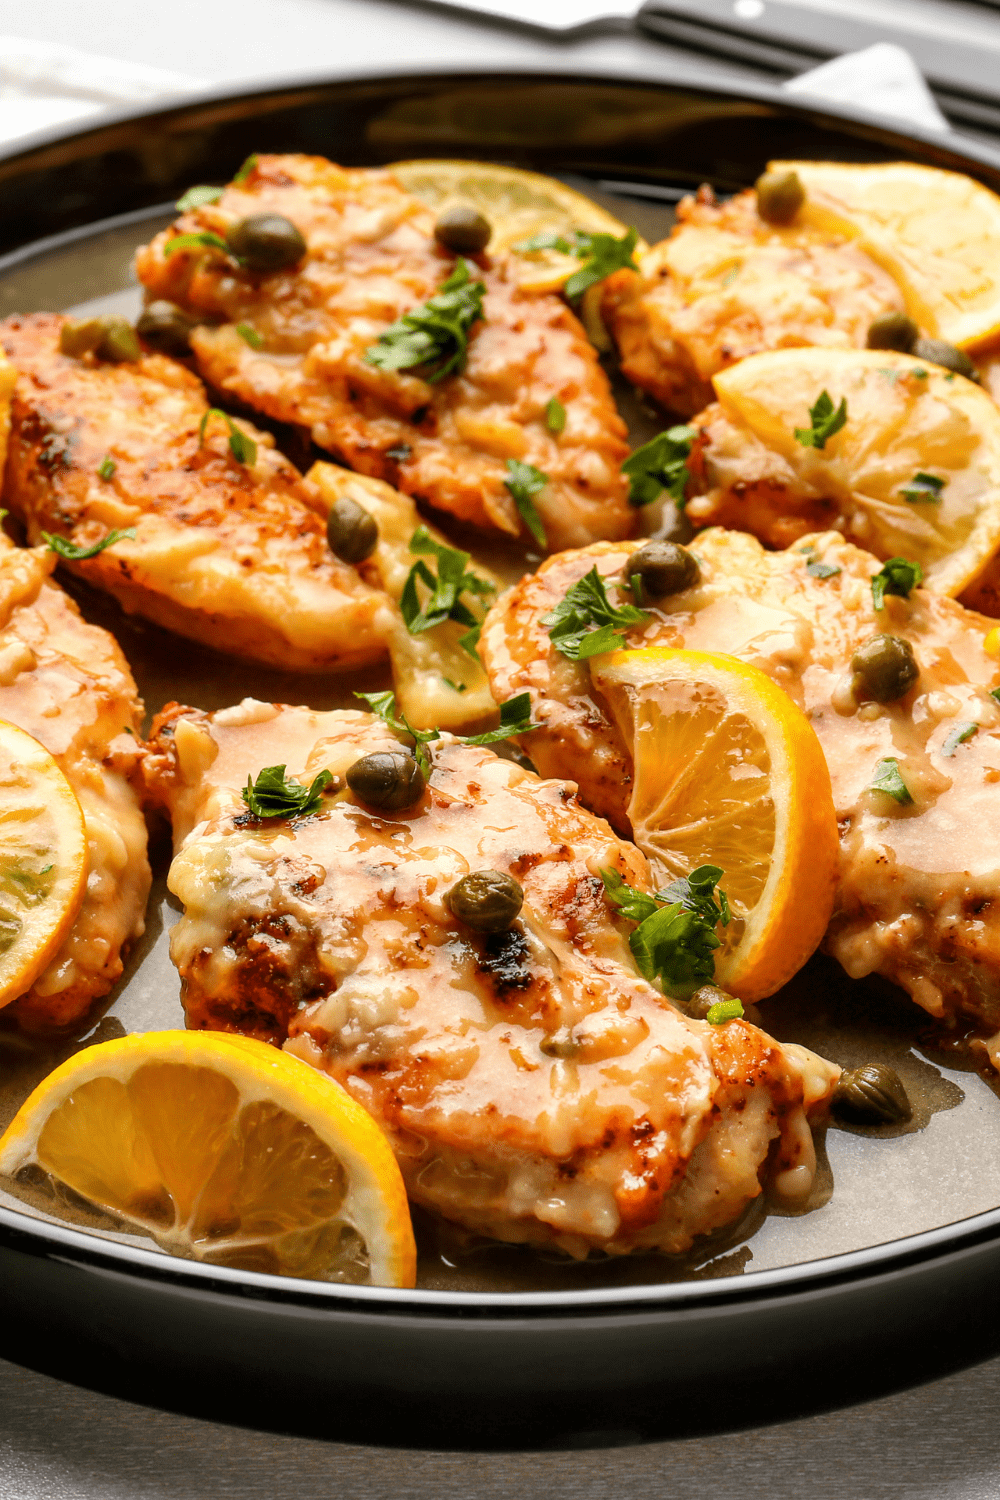 Chicken Picatta with Sauce, Lemons and Peas